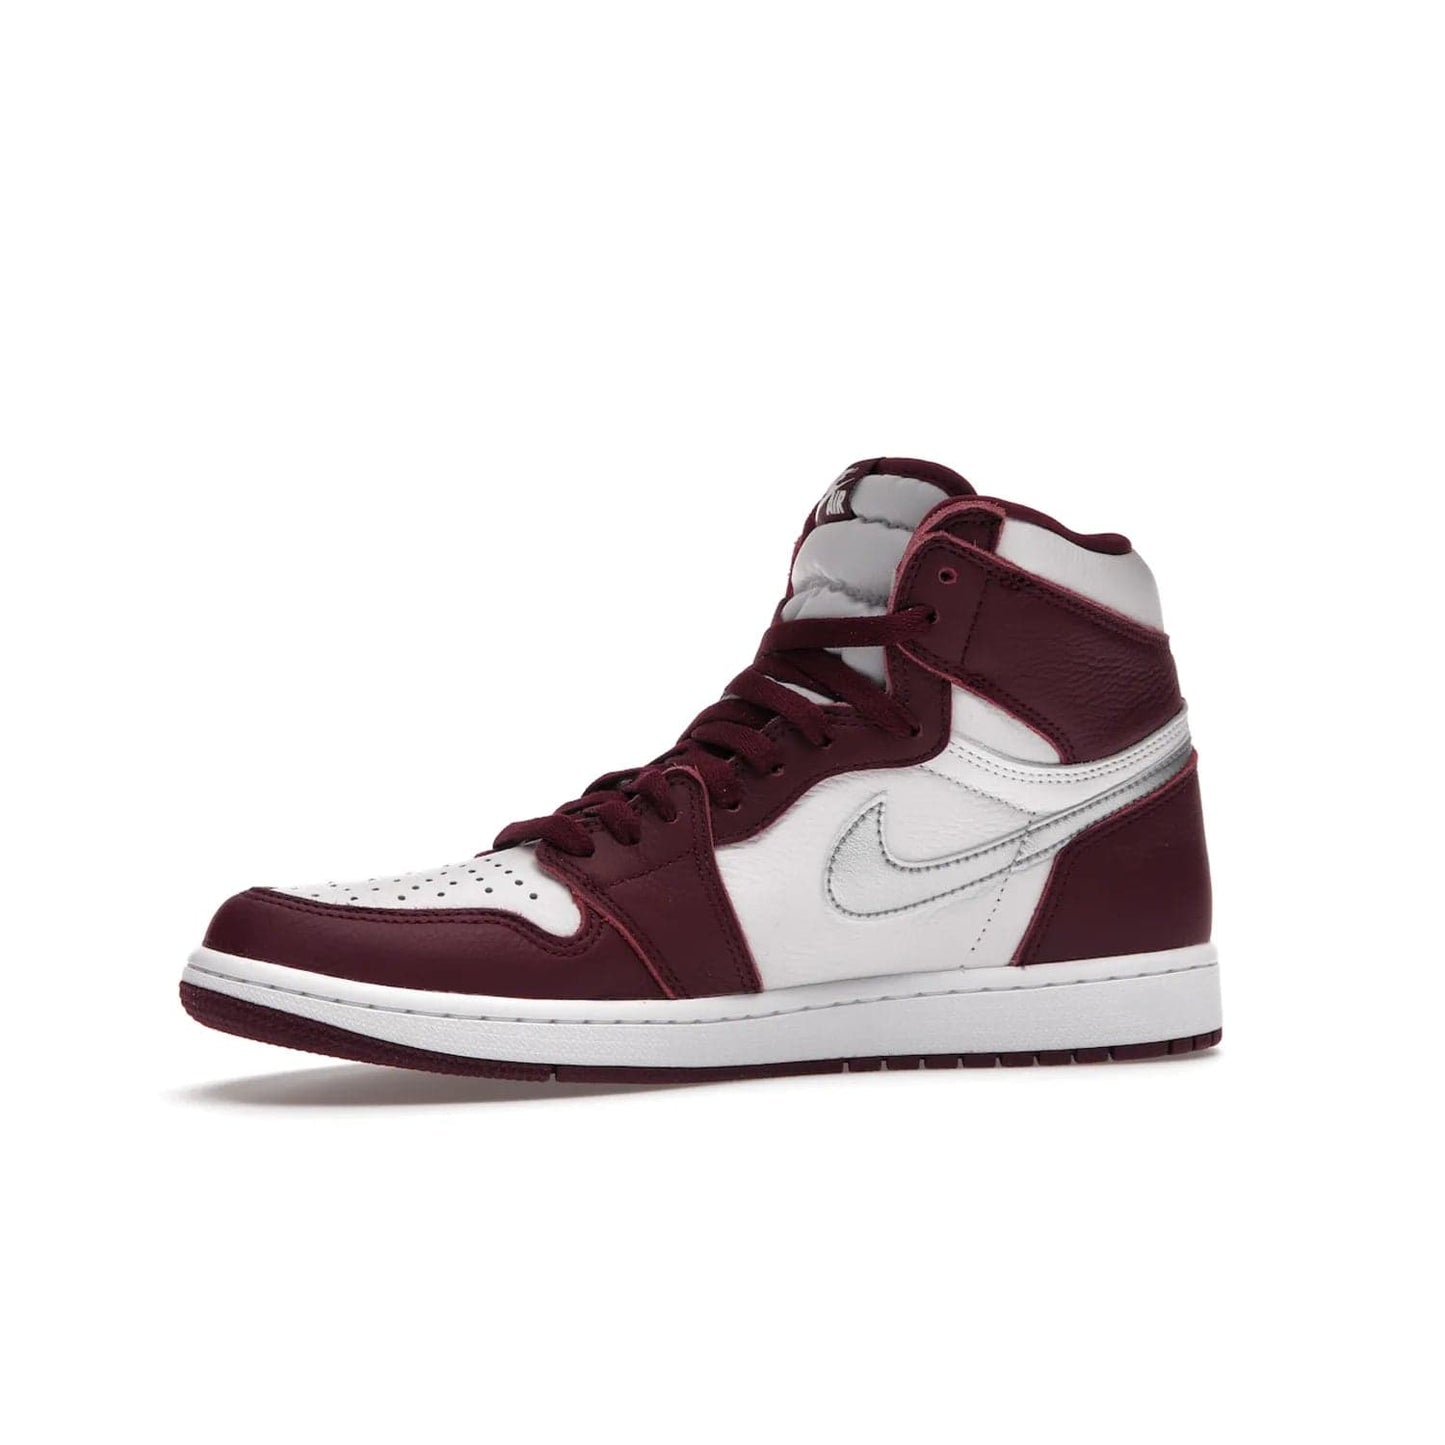 Jordan 1 Retro High OG Bordeaux - Image 17 - Only at www.BallersClubKickz.com - Shop the classic Air Jordan 1 High Bordeaux with a modern high-top cut. The timeless Bordeaux and White-Metallic Silver colorway, releasing Nov 20, 2021, is perfect for practice or a night out.